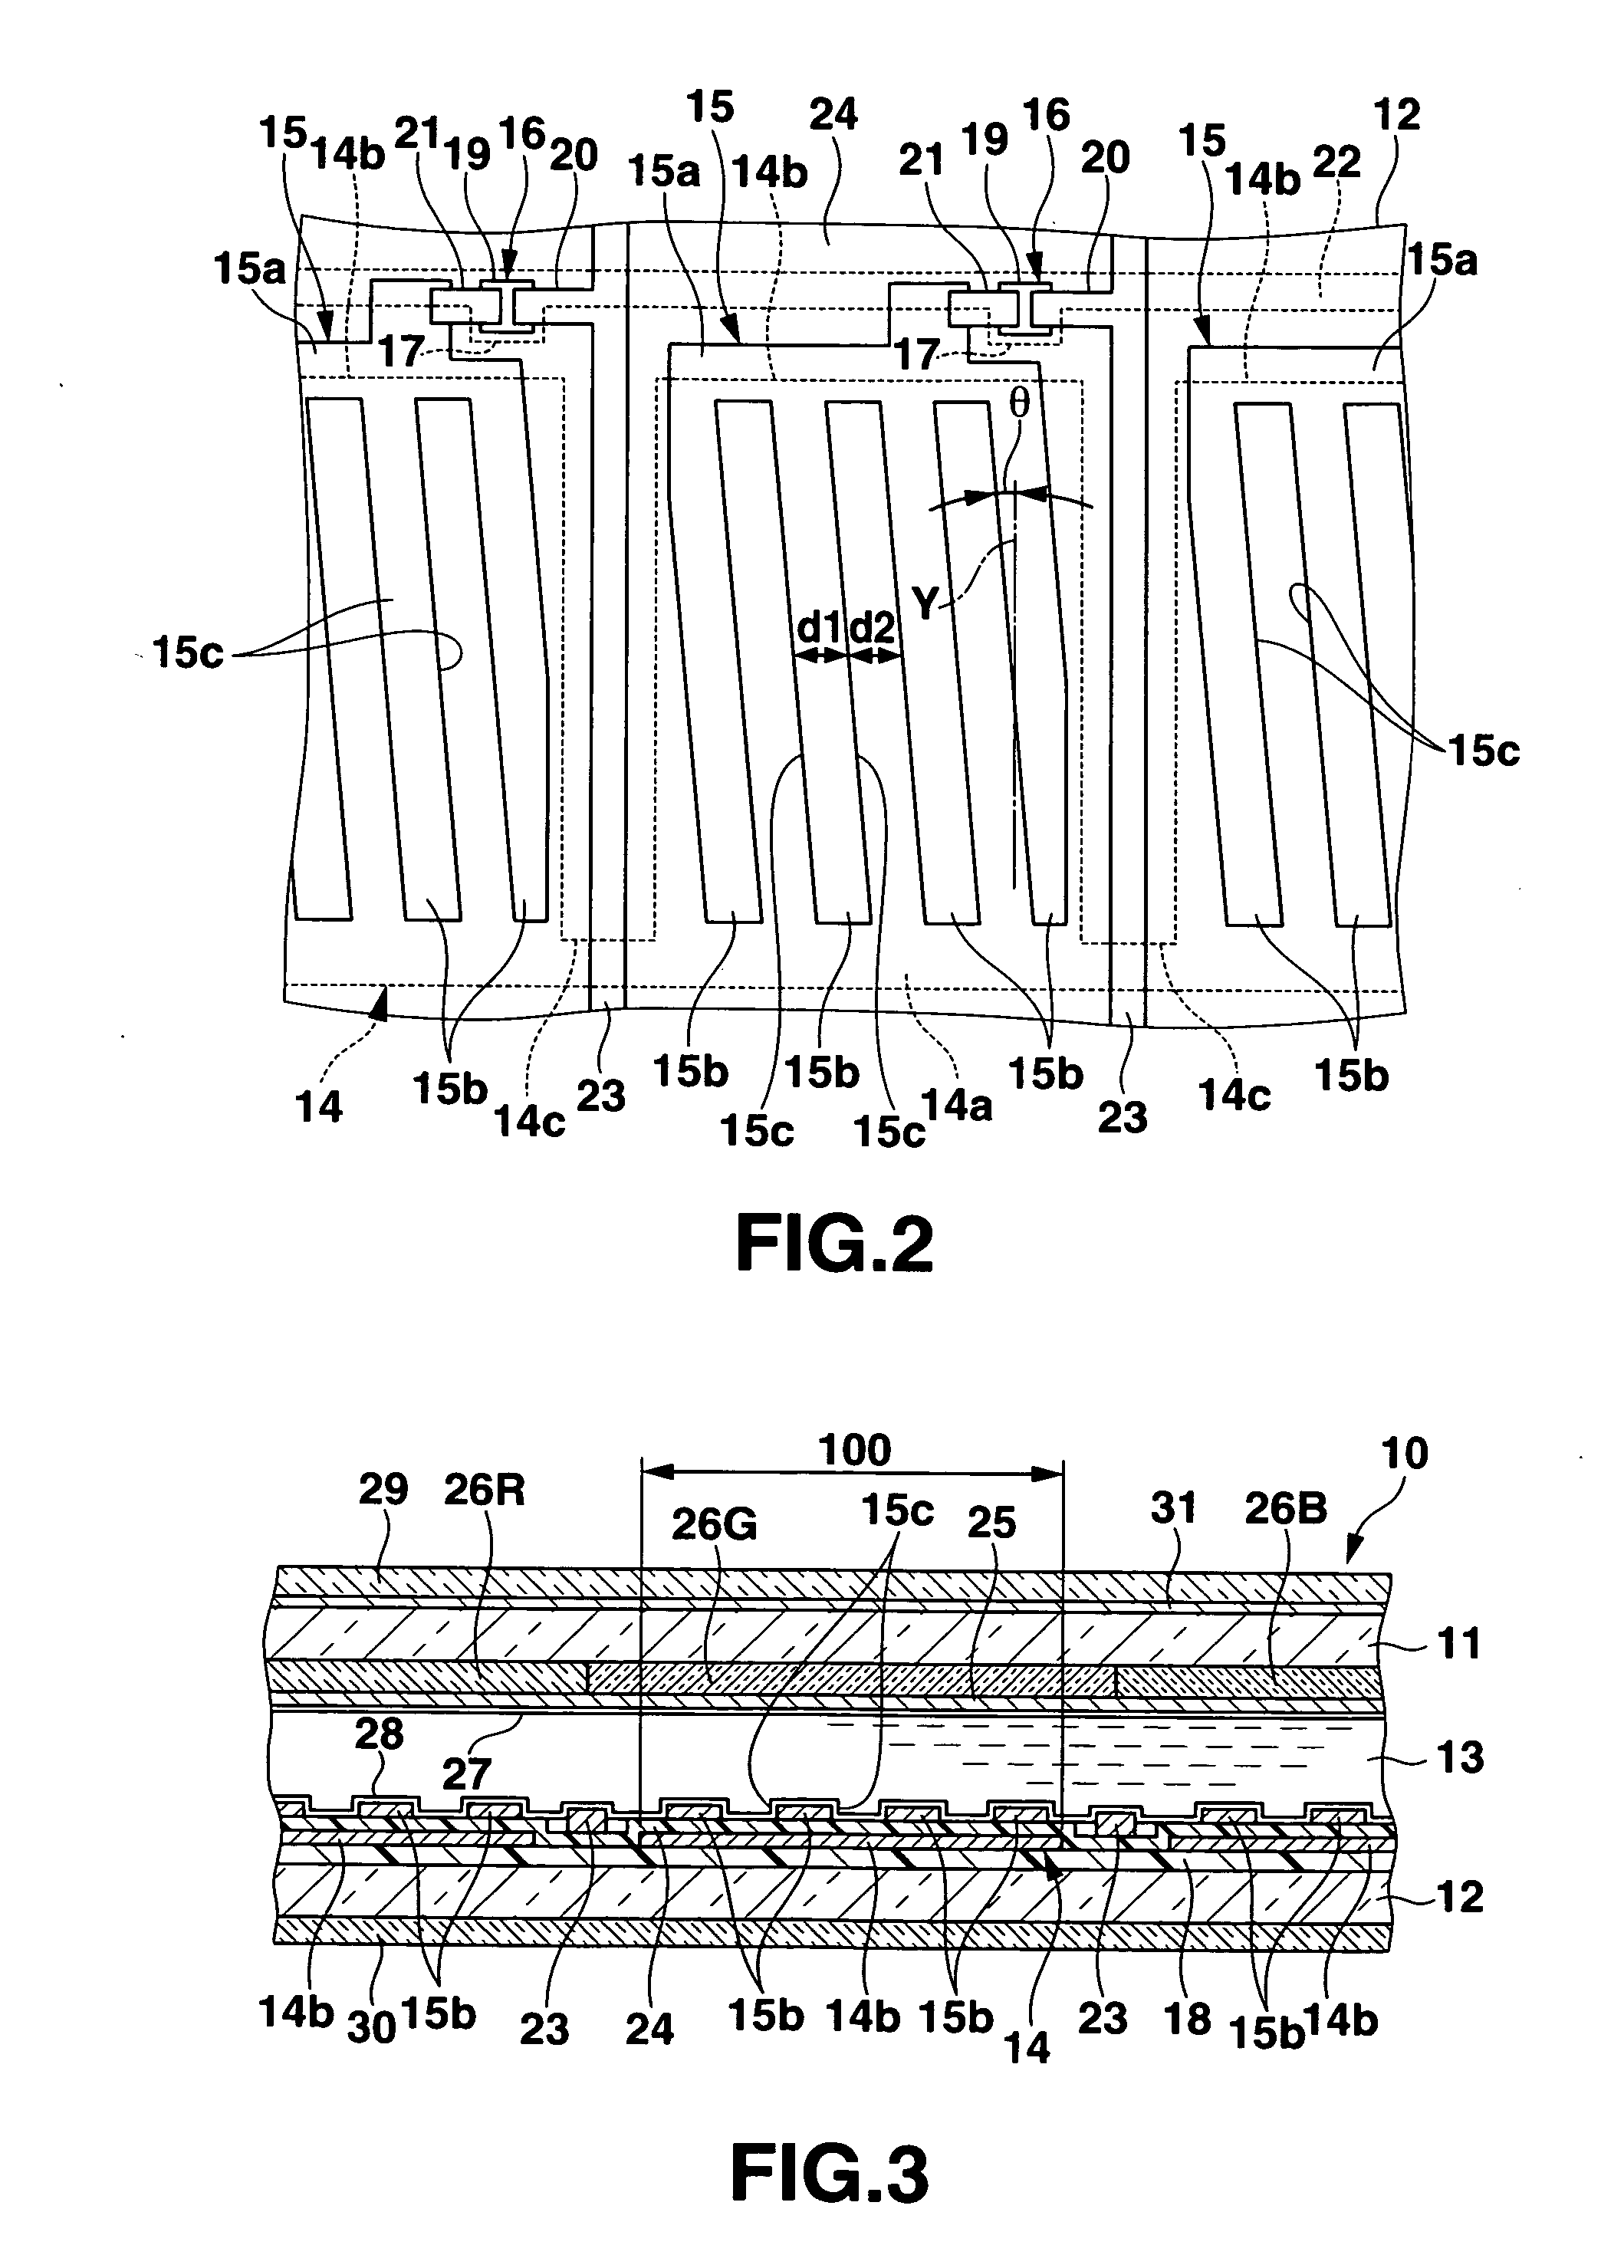 Liquid crystal display apparatus capable of controlling range of viewing angle